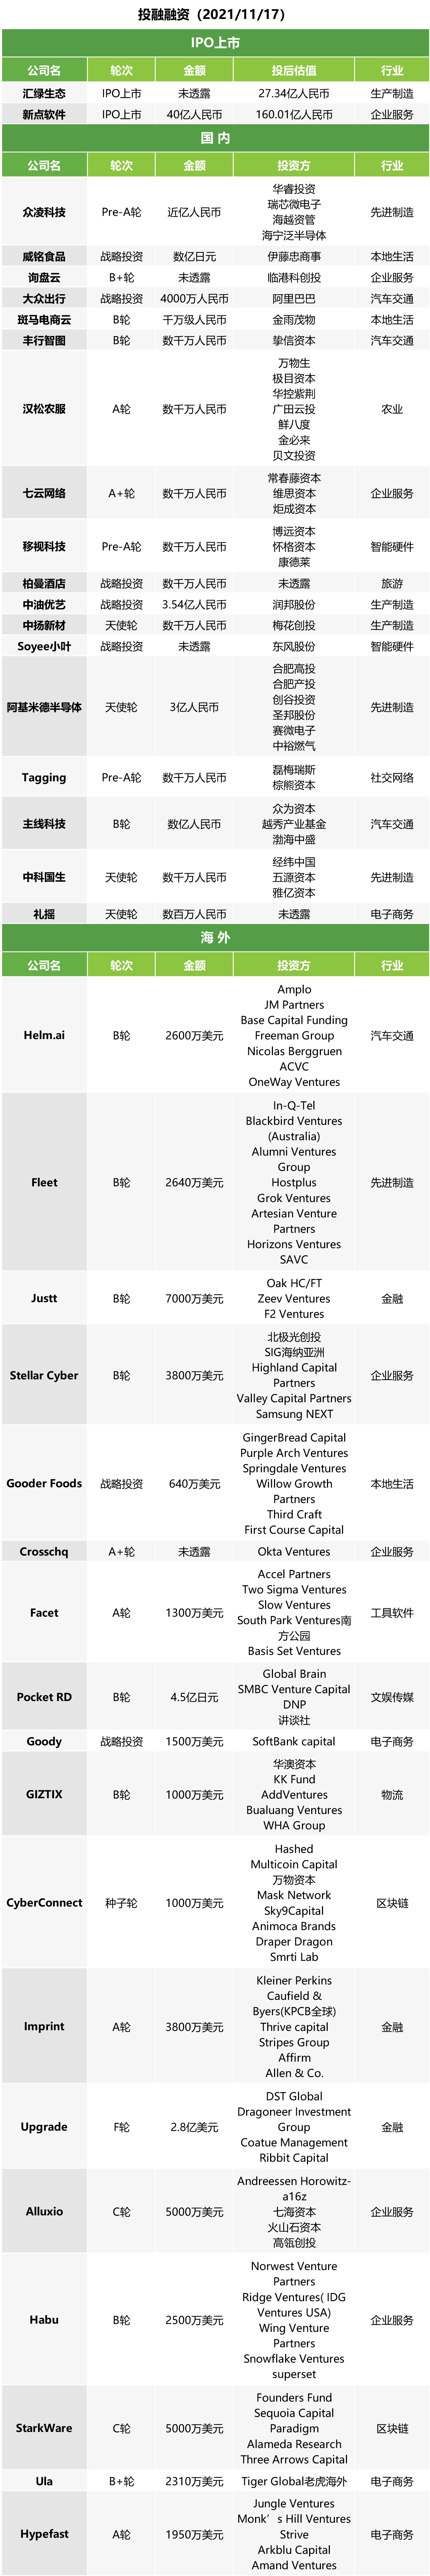 Cross border E-commerce Investment and Financing News | PetroChina Youyi completed 354 million yuan of equity transfer financing; Archimedes Semiconductor won 300 million yuan of angel round financing; Mainline technology completed a new round of financing worth hundreds of millions of yuan